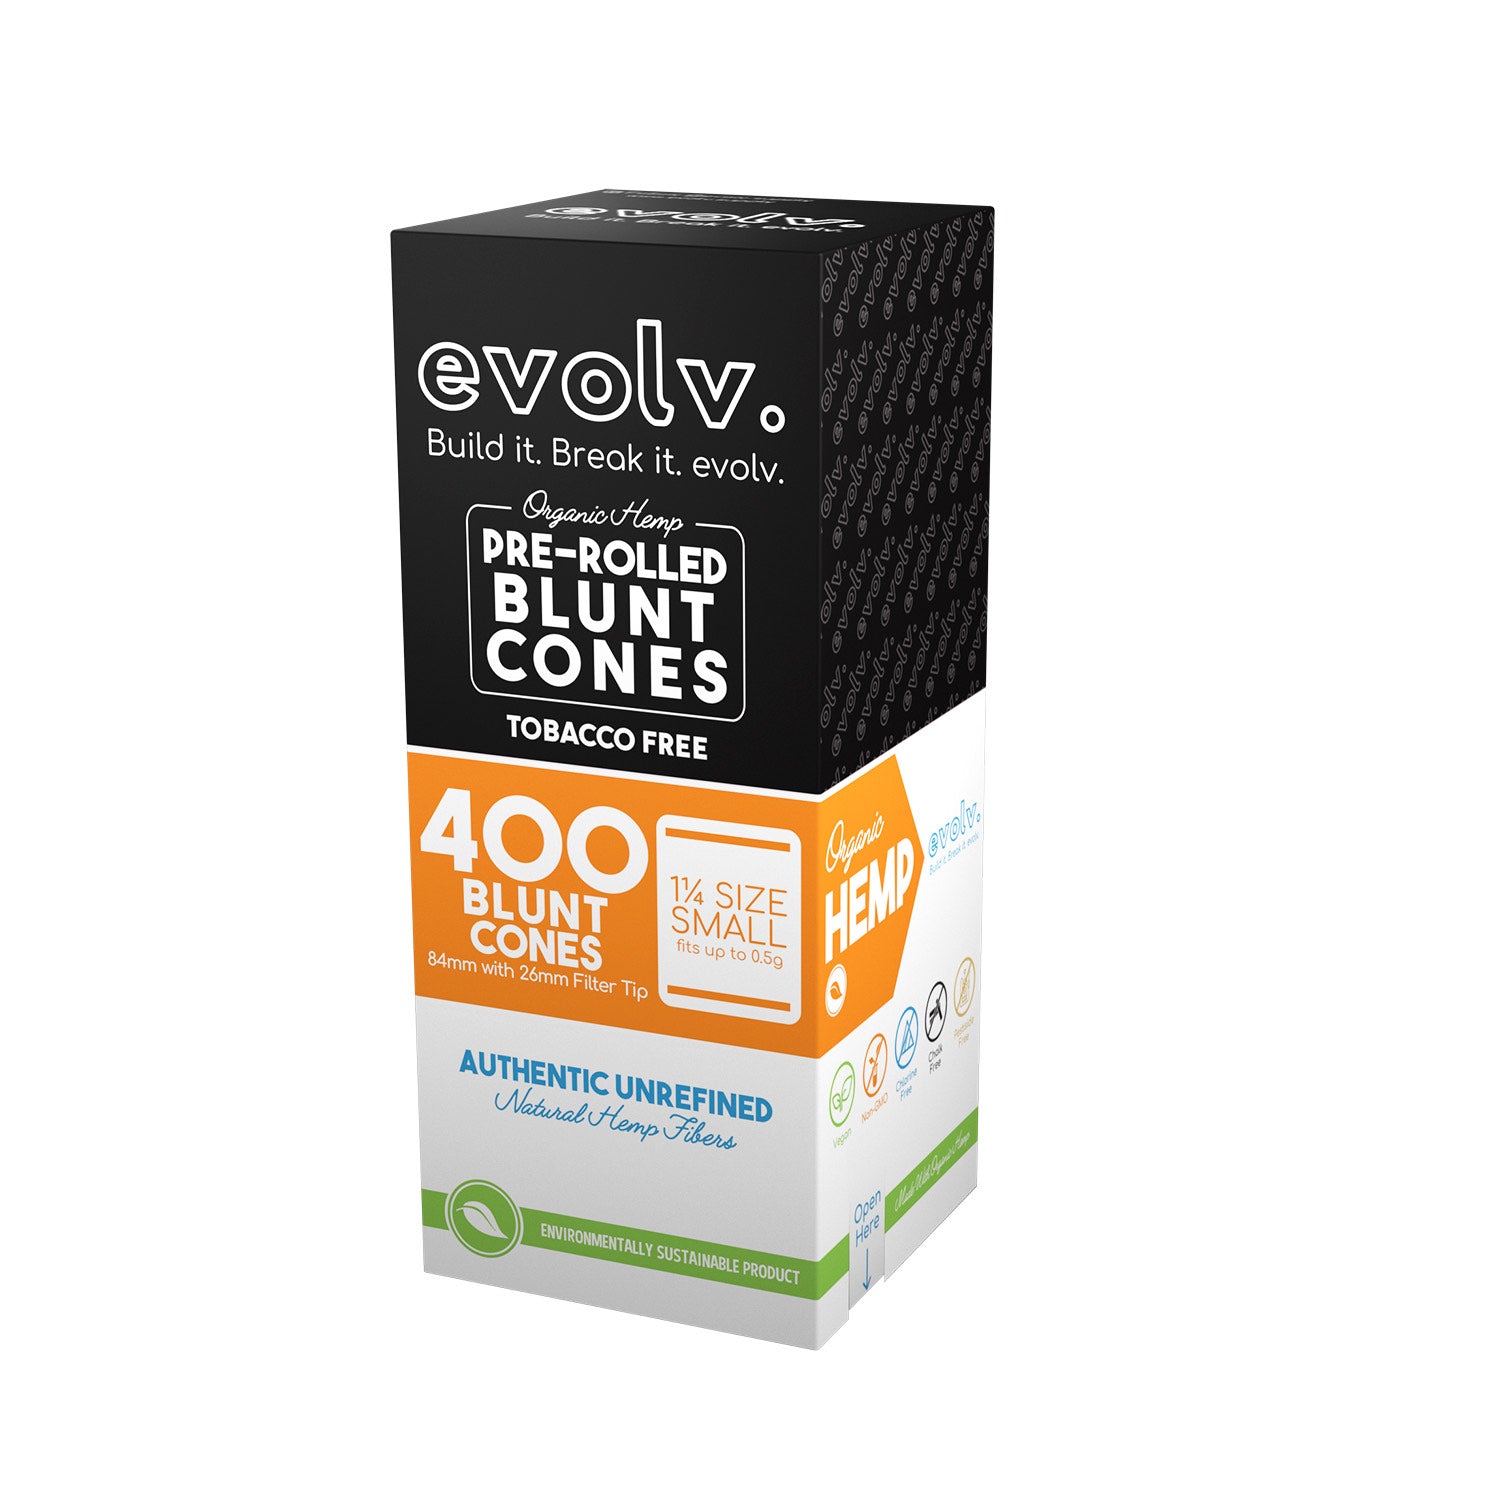 Evolv Pre-Rolled Blunt Cones | 1 1/4 Size: 84mm/ 26mm | 400/Pack